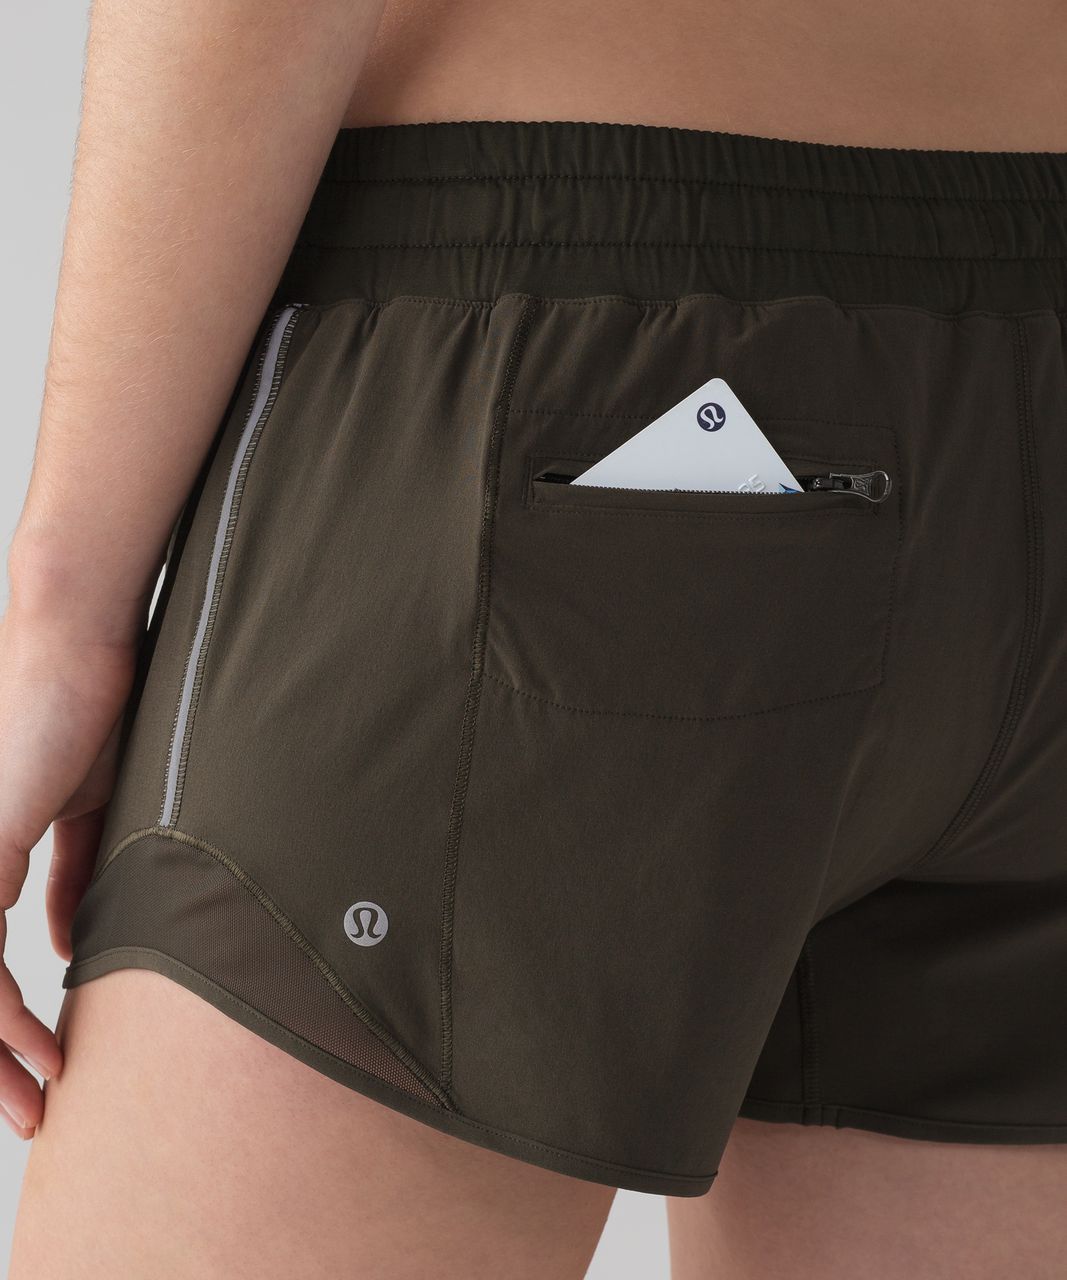 Lululemon Hotty Hot LR Short 4 - Heritage 365 Camo Dark Olive Multi Size 6  - $61 (10% Off Retail) - From A